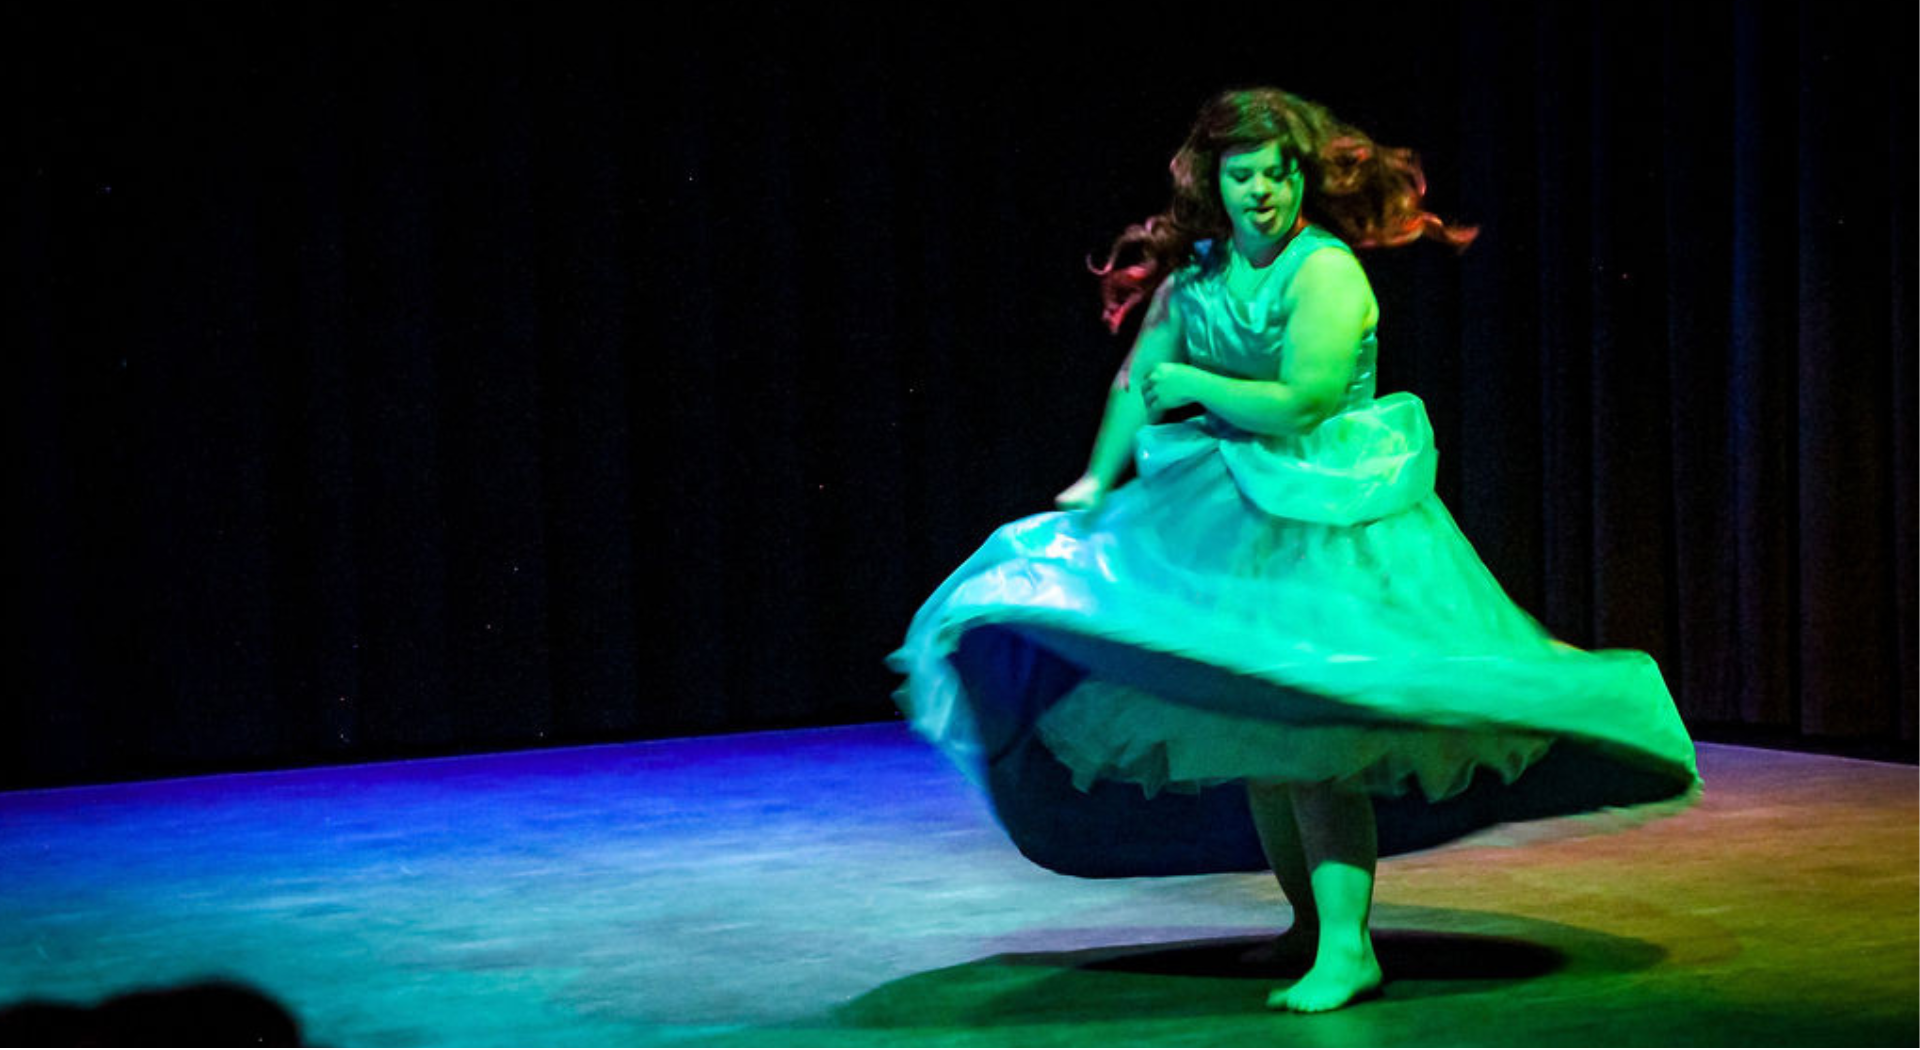 An image of an NaAC performer spinning in a costume on stage with blue light casted on the left side and a green light highlighting the right side of the stage and performer.